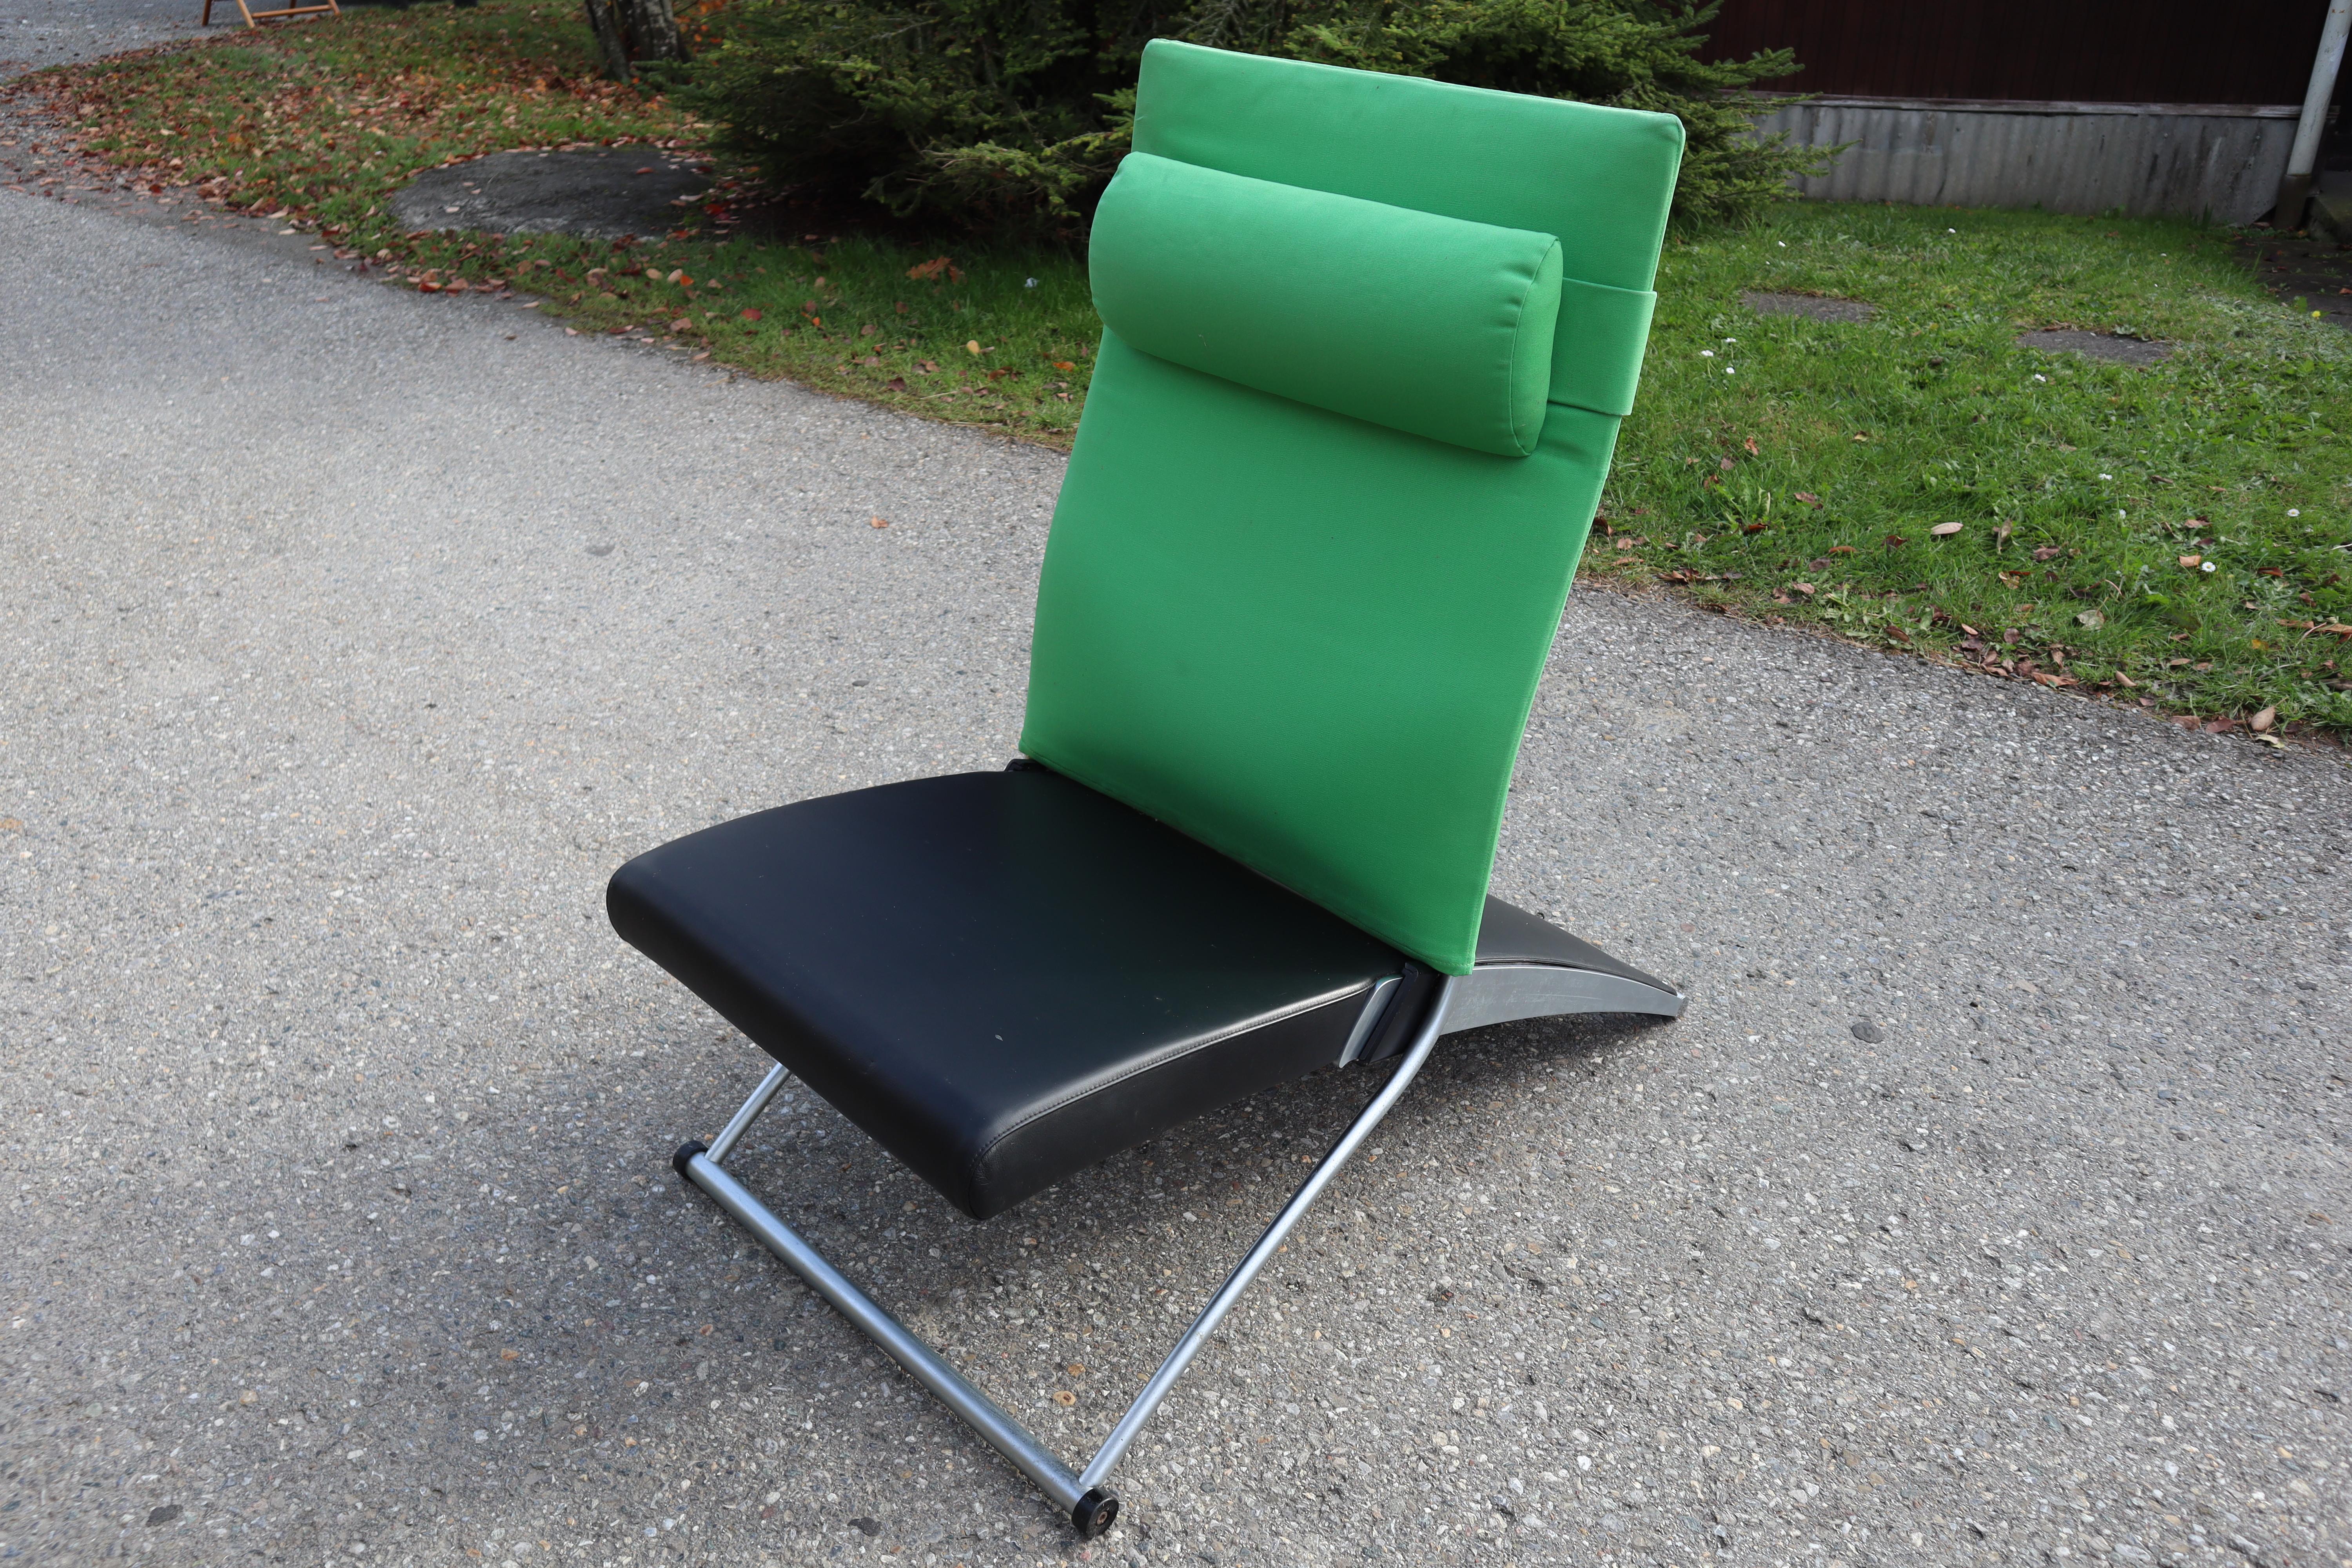 The highly awarded, sleek and functional X Chair by Joachim Nees for Interprofil, Germany.

Silver painted metal frame with black leather upholstered seat and green fabric upholstered back rest.

A special upholstery support in the lumbar region and